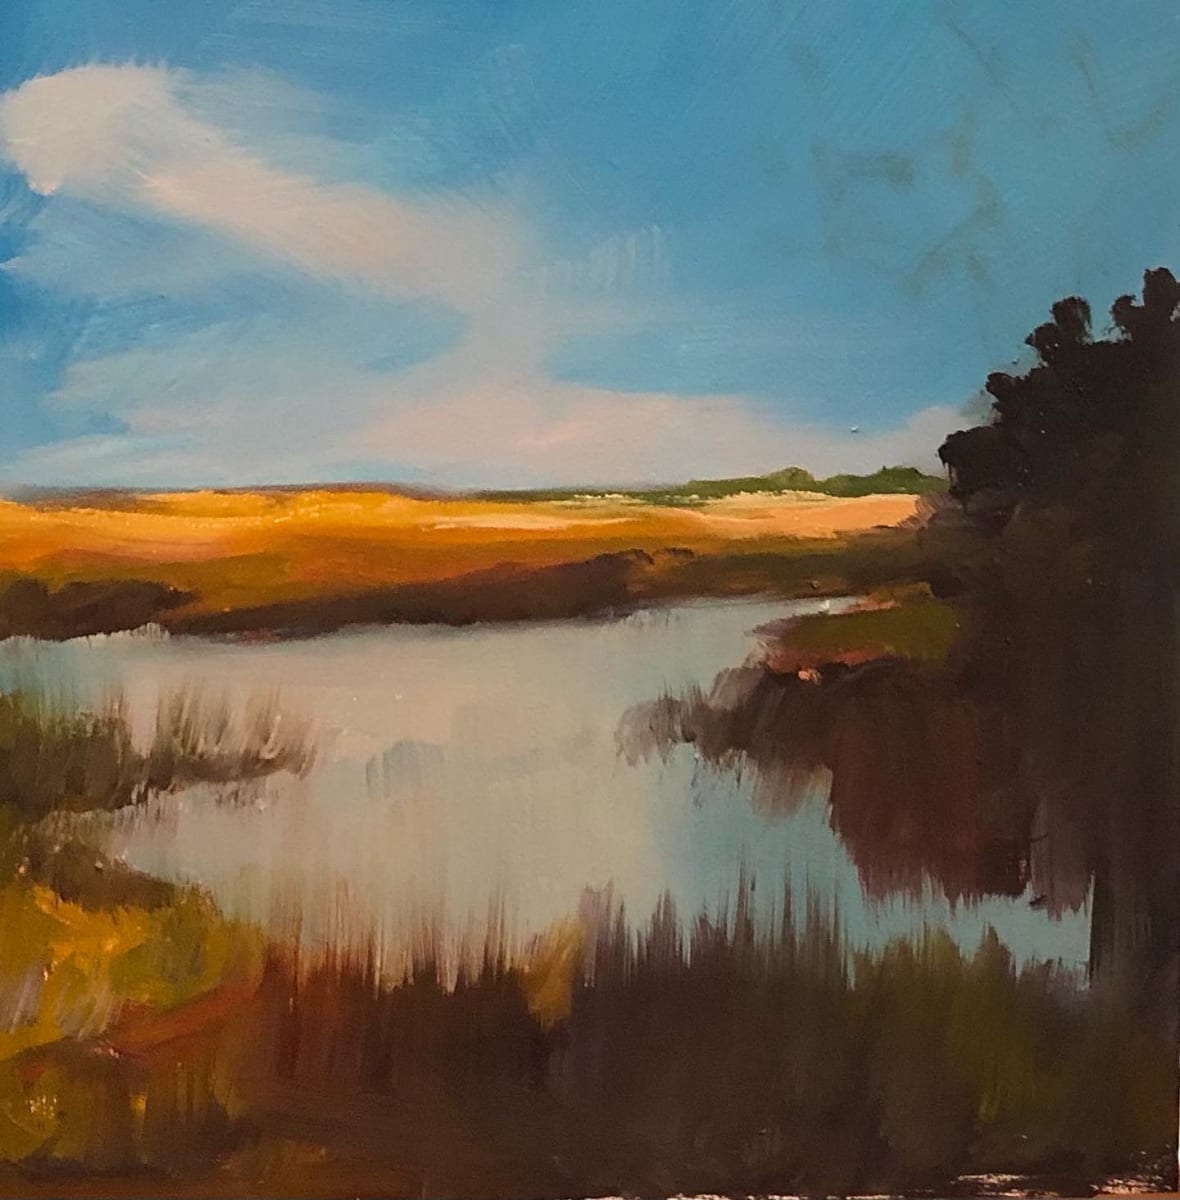 small scape-low country #10  Image: Scape Sketch Collection-special places on my journey of life

scape sketch-low country #10

6x6 oil on ampersand museum gesso panel 2022

This painting was inspired by the views of the marshlands in the low country of South Carolina.